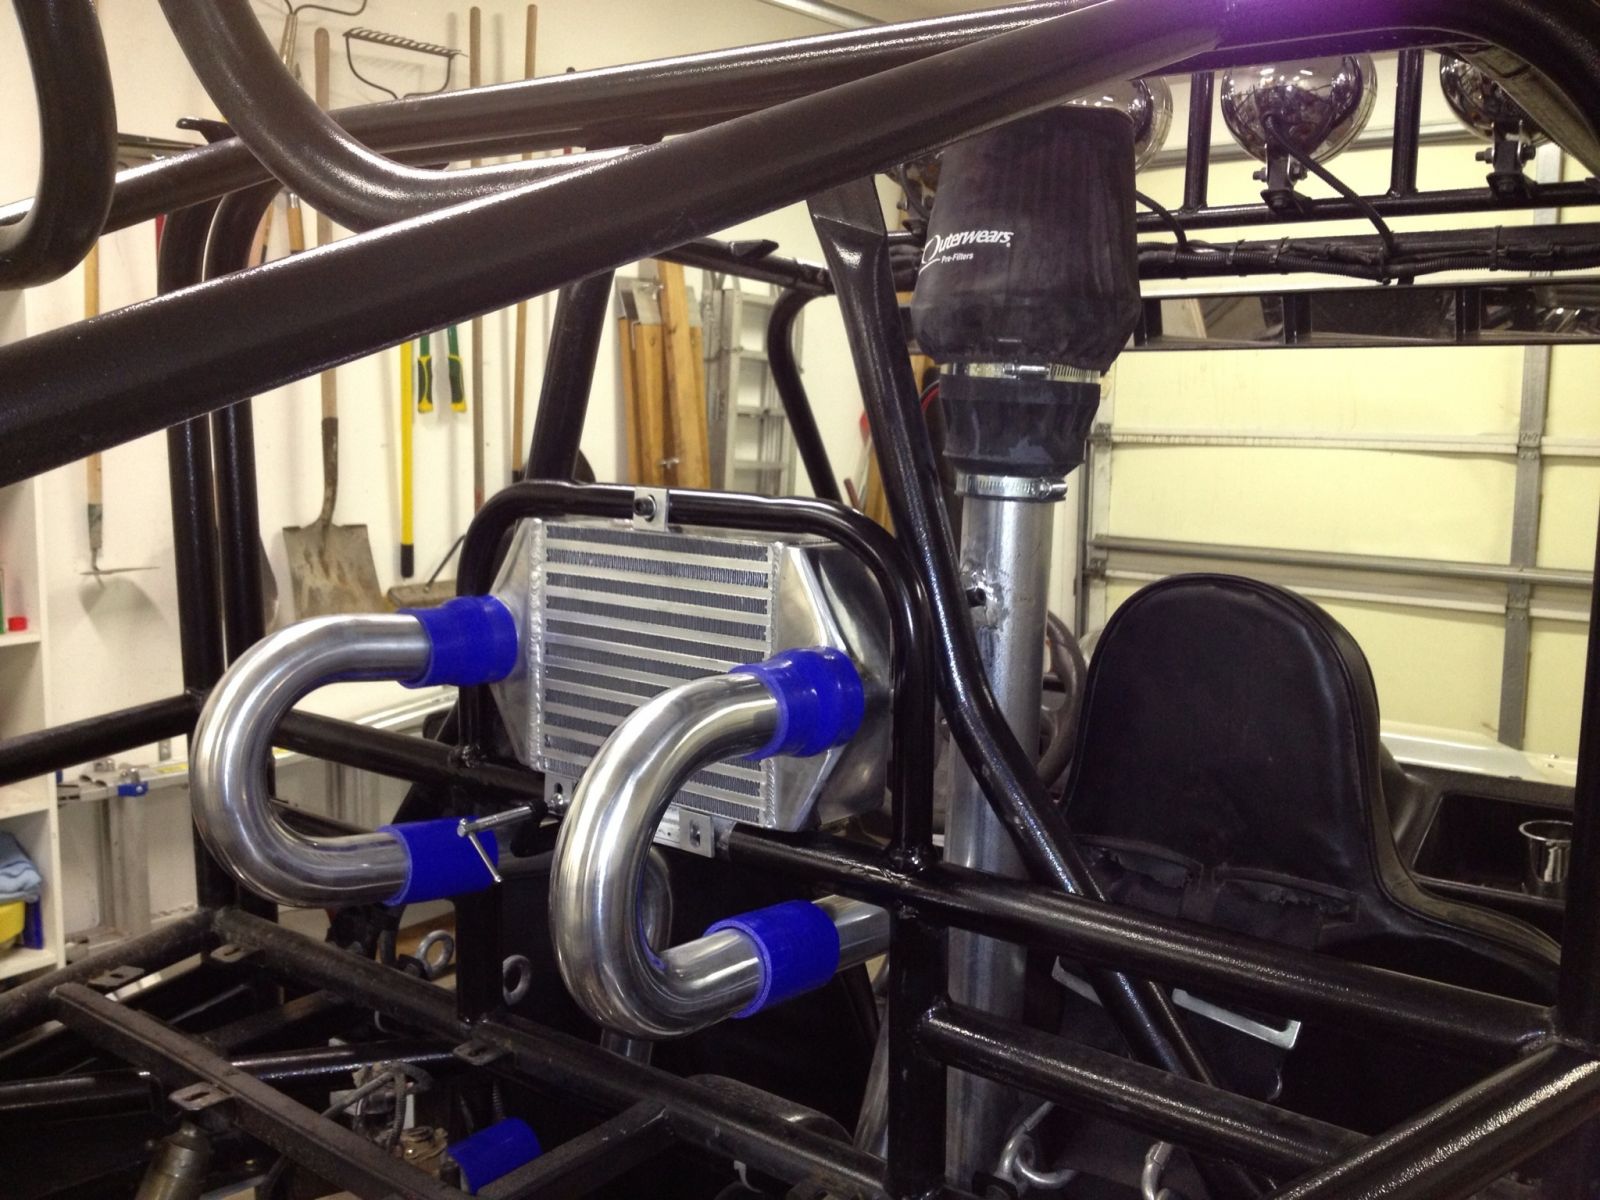 Intercooler and relocated snorkel